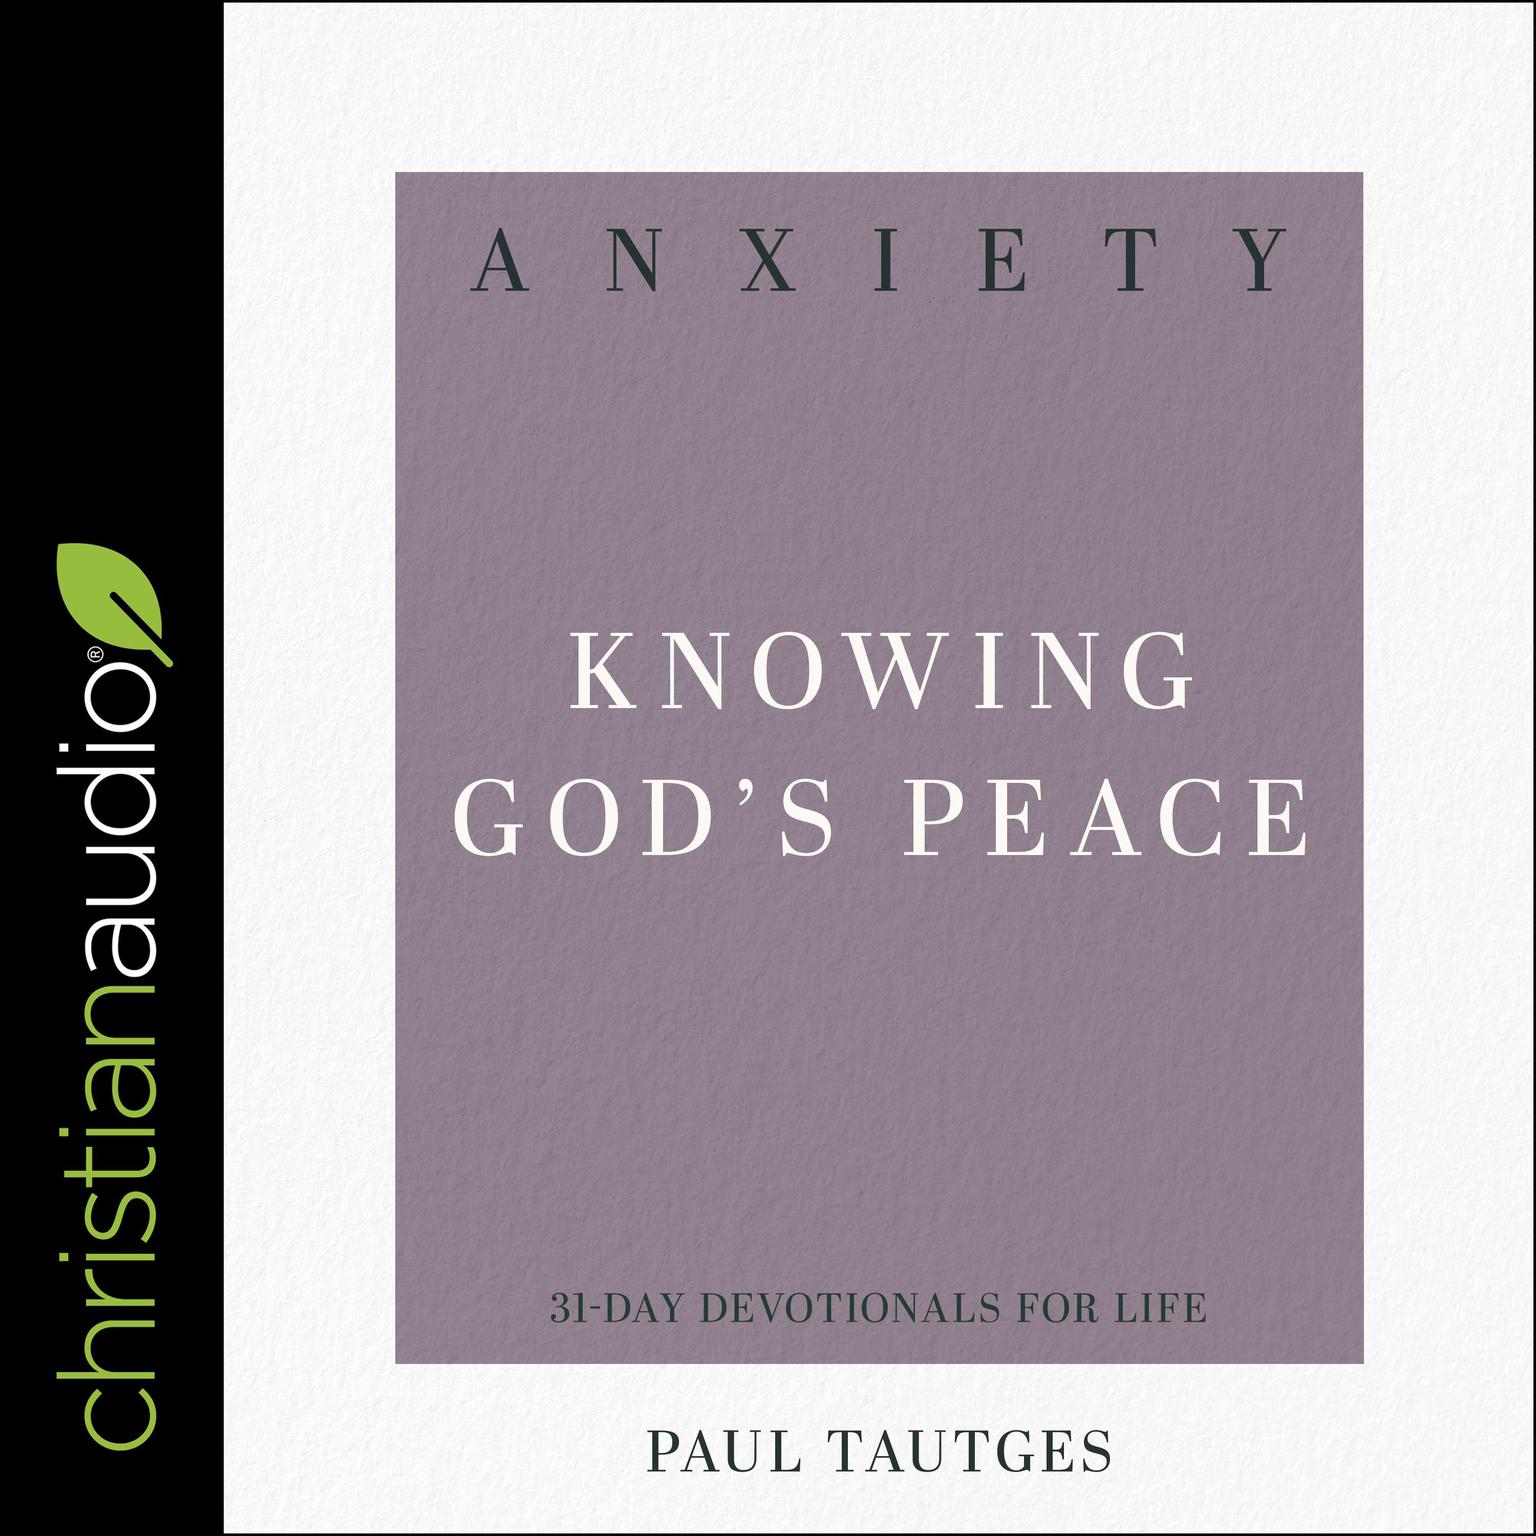 Anxiety: Knowing Gods Peace (31-Day Devotionals for Life) Audiobook, by Paul Tautges